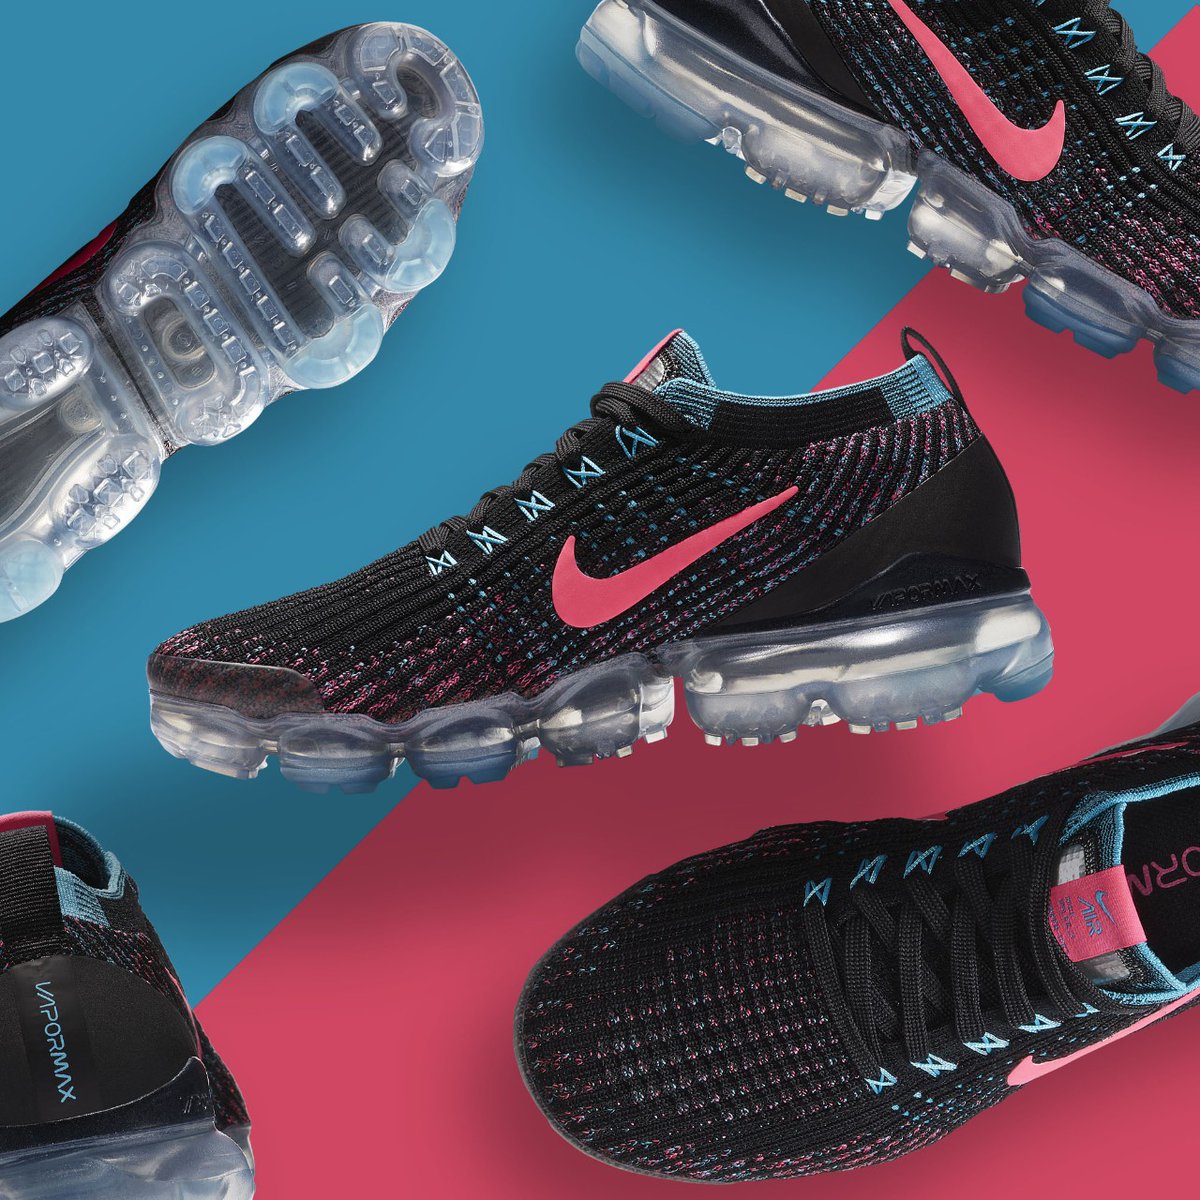 Alegre Existe Trastorno Footaction on Twitter: "To the Max. #AirMaxMondays Shop the #Nike Vapormax  Flyknit 3 online now. https://t.co/H4s3OmCPGv https://t.co/kNncqcMyKi" /  Twitter